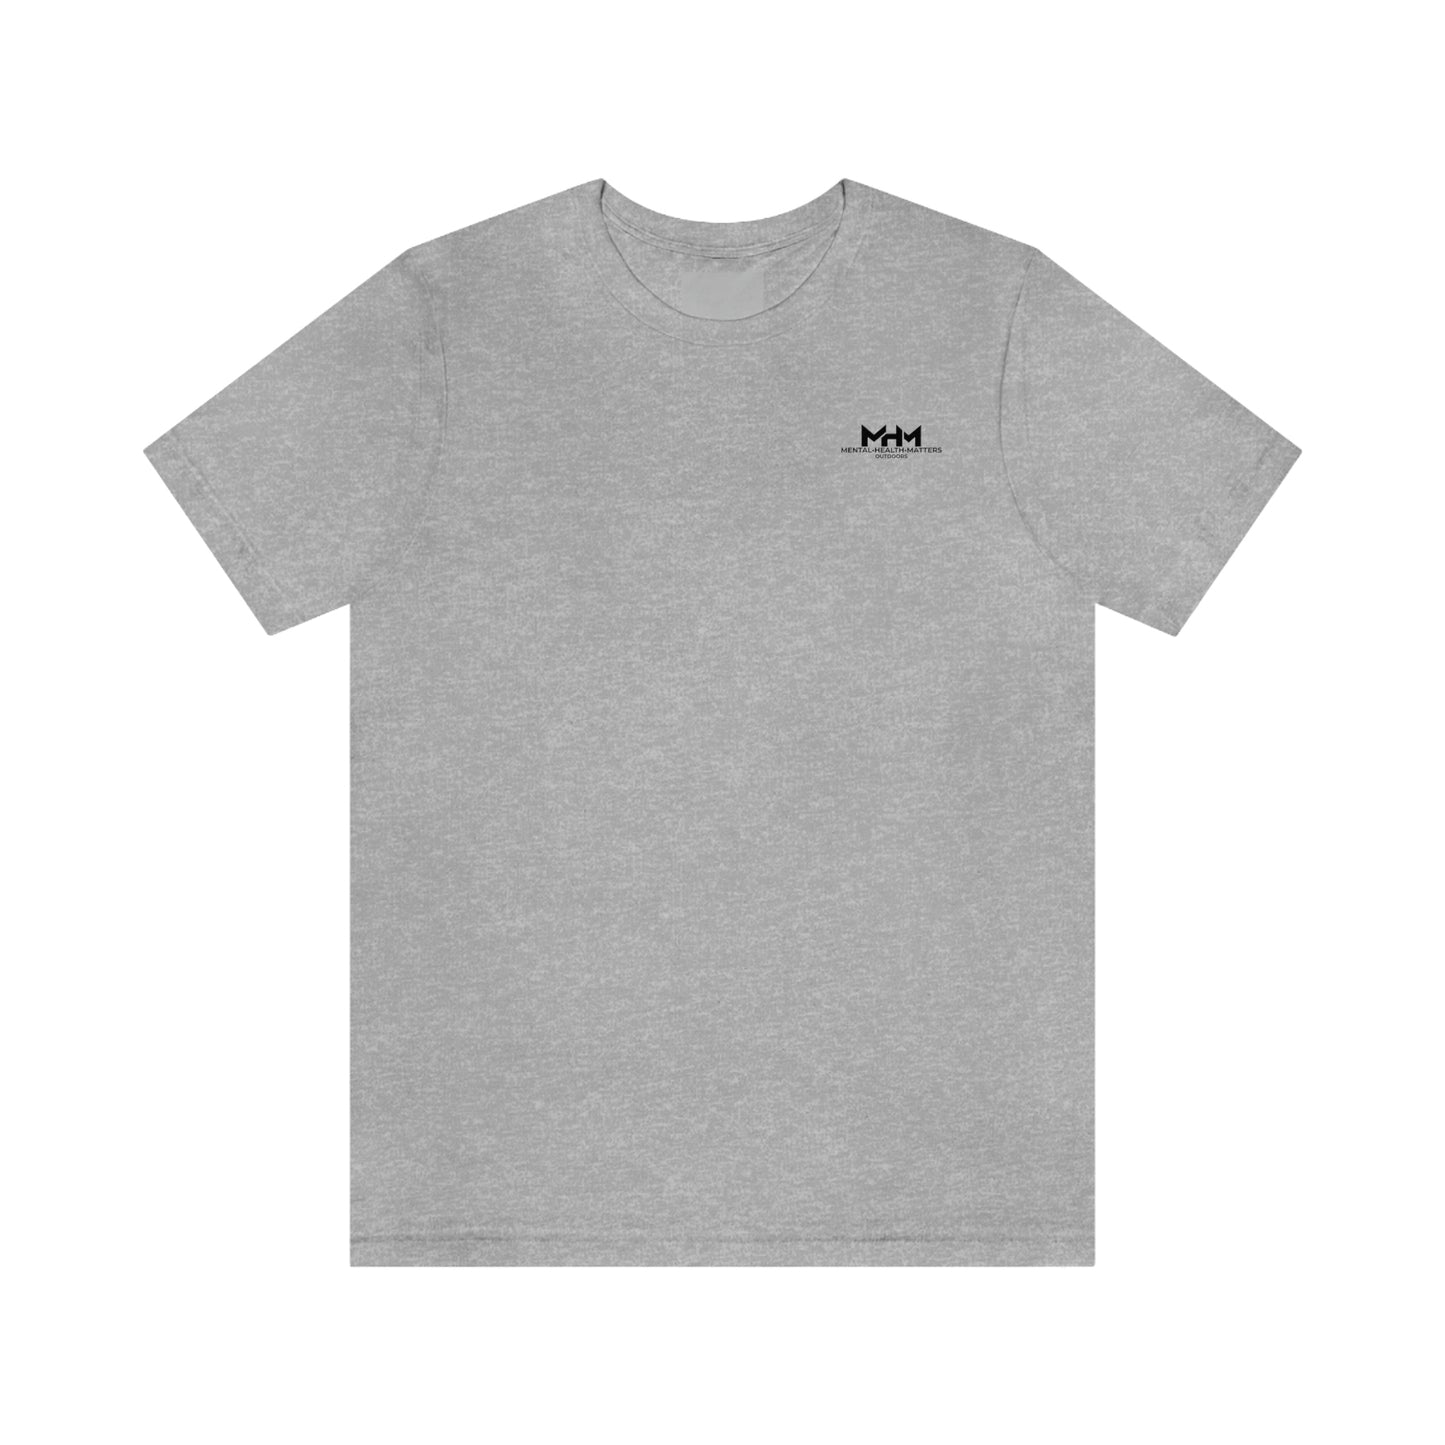 Jumper T-Shirt (5 Colors Available)